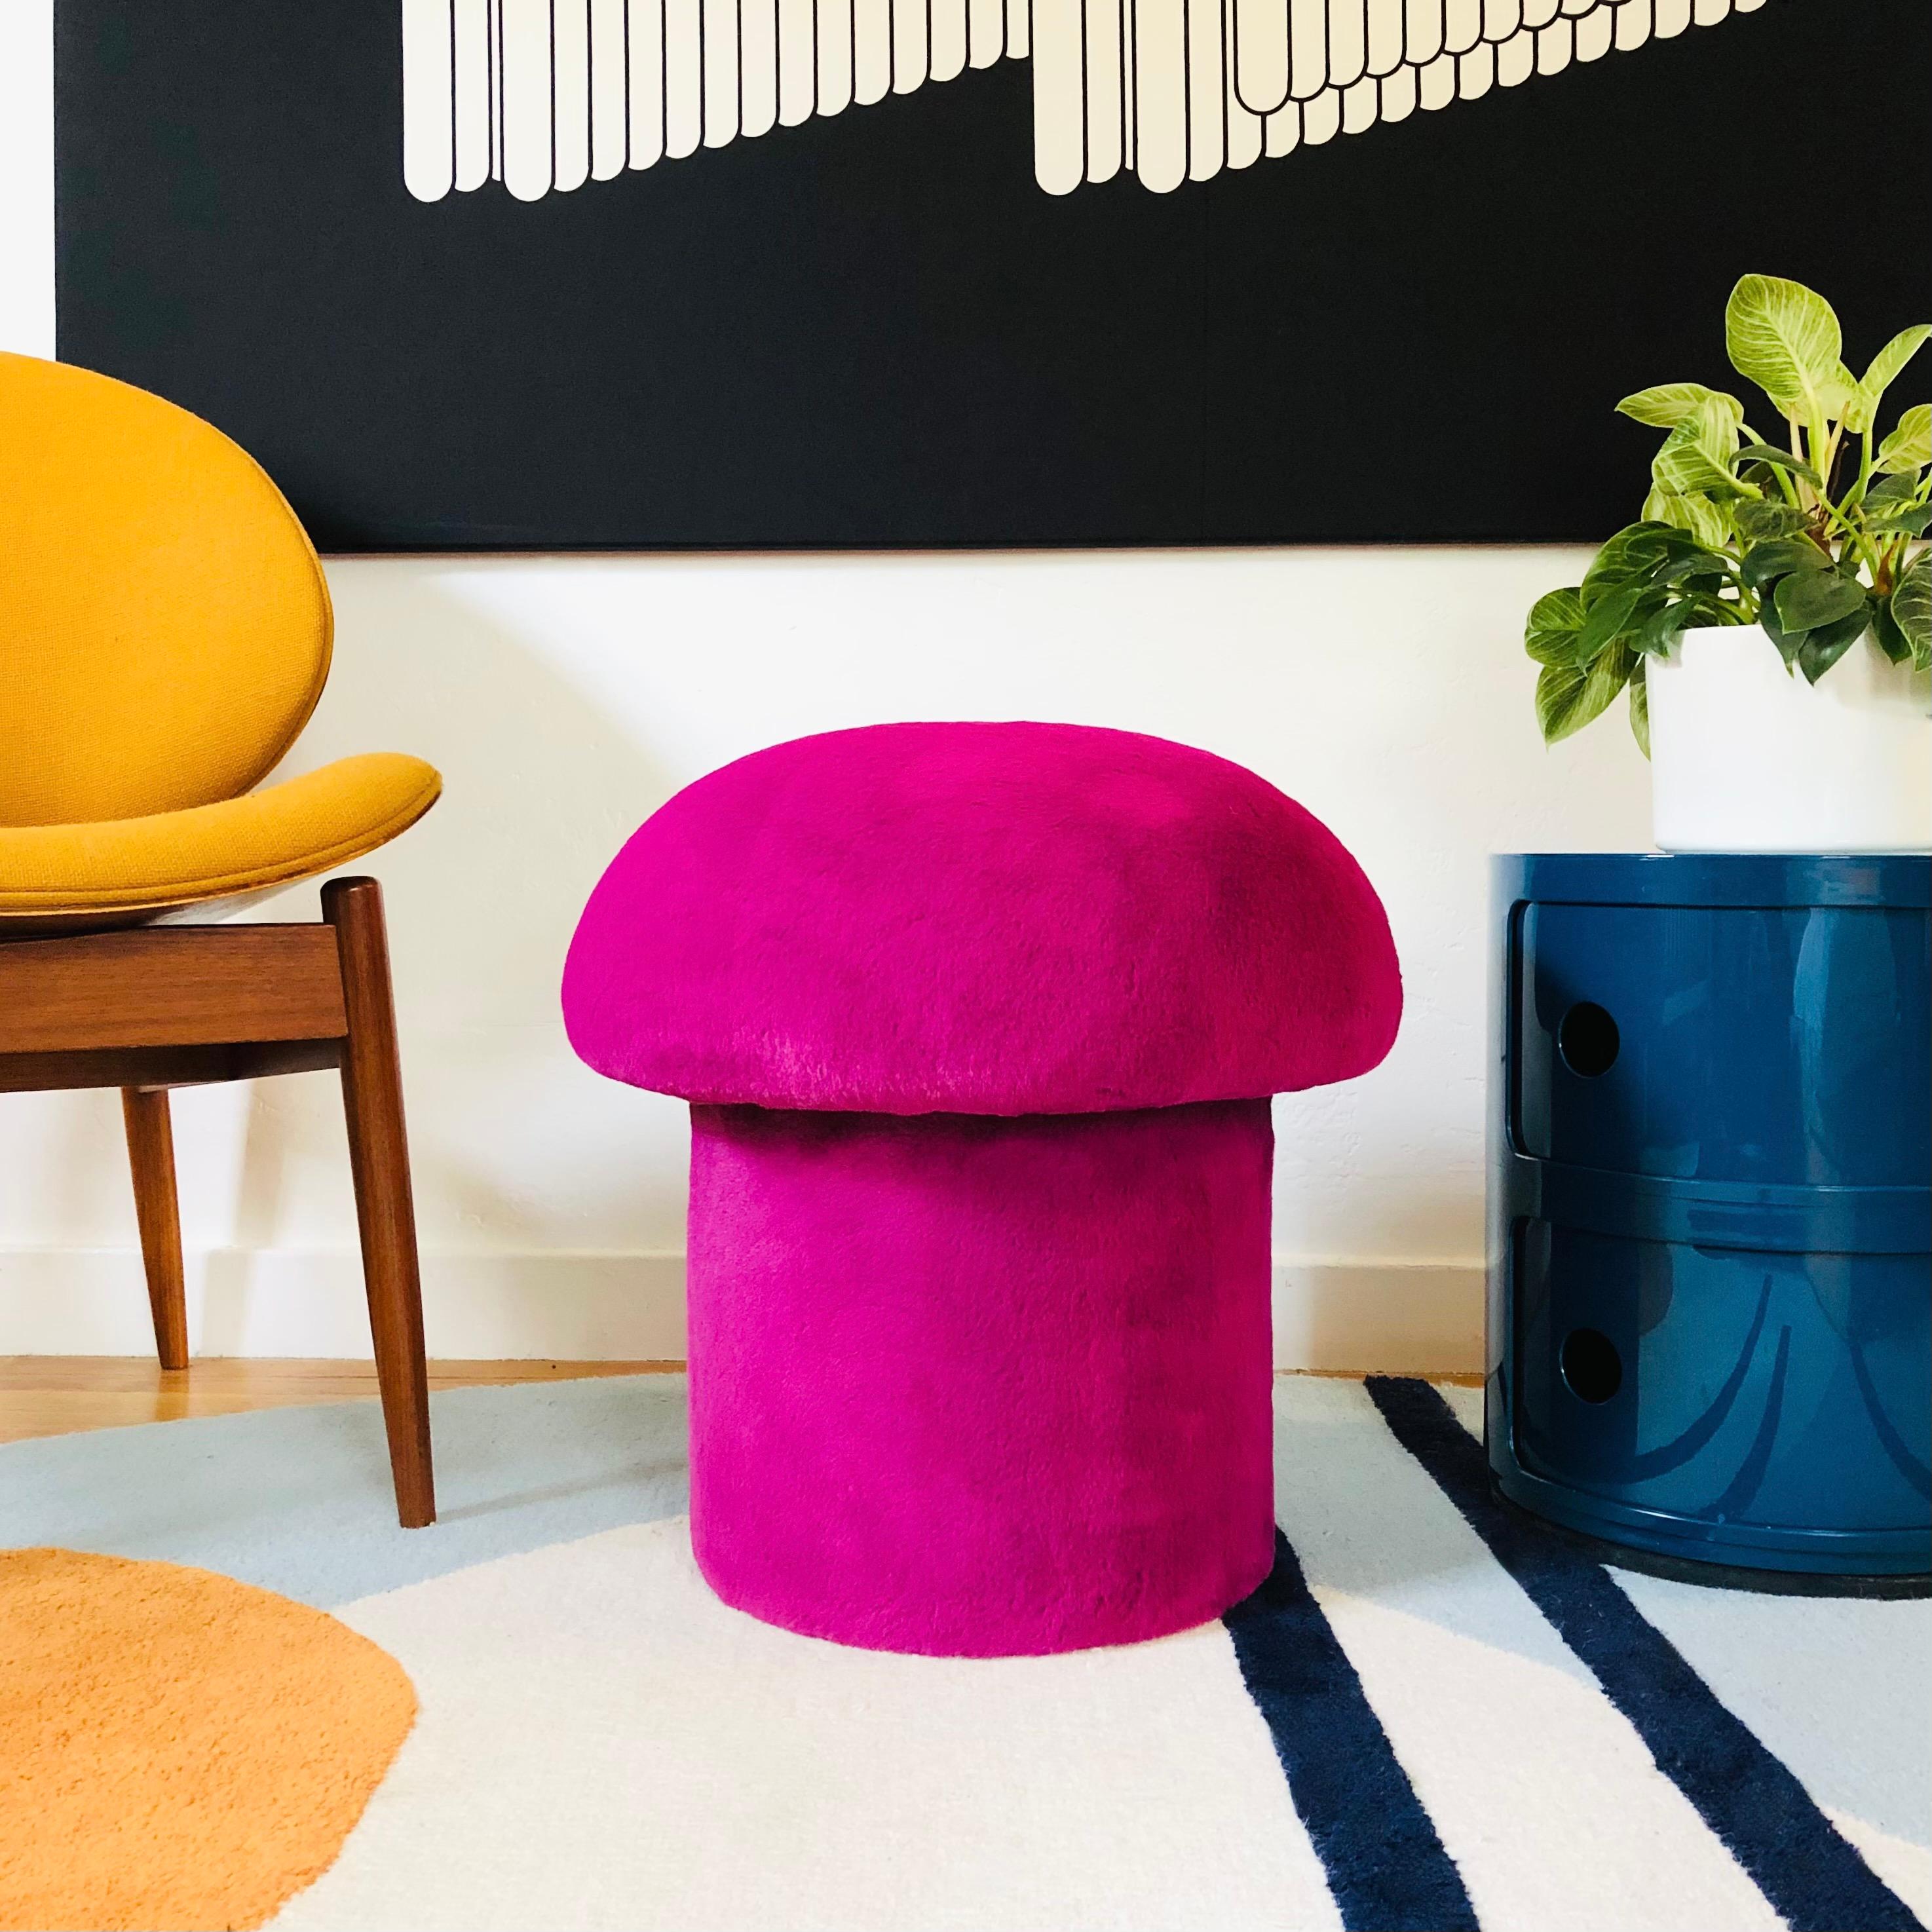 A handmade mushroom shaped ottoman, upholstered in a tourmaline fuchsia colored high pile plush fabric. Perfect for using as a footstool or extra occasional seating. A comfortable cushioned seat and sculptural accent piece.
PLEASE NOTE:
Color